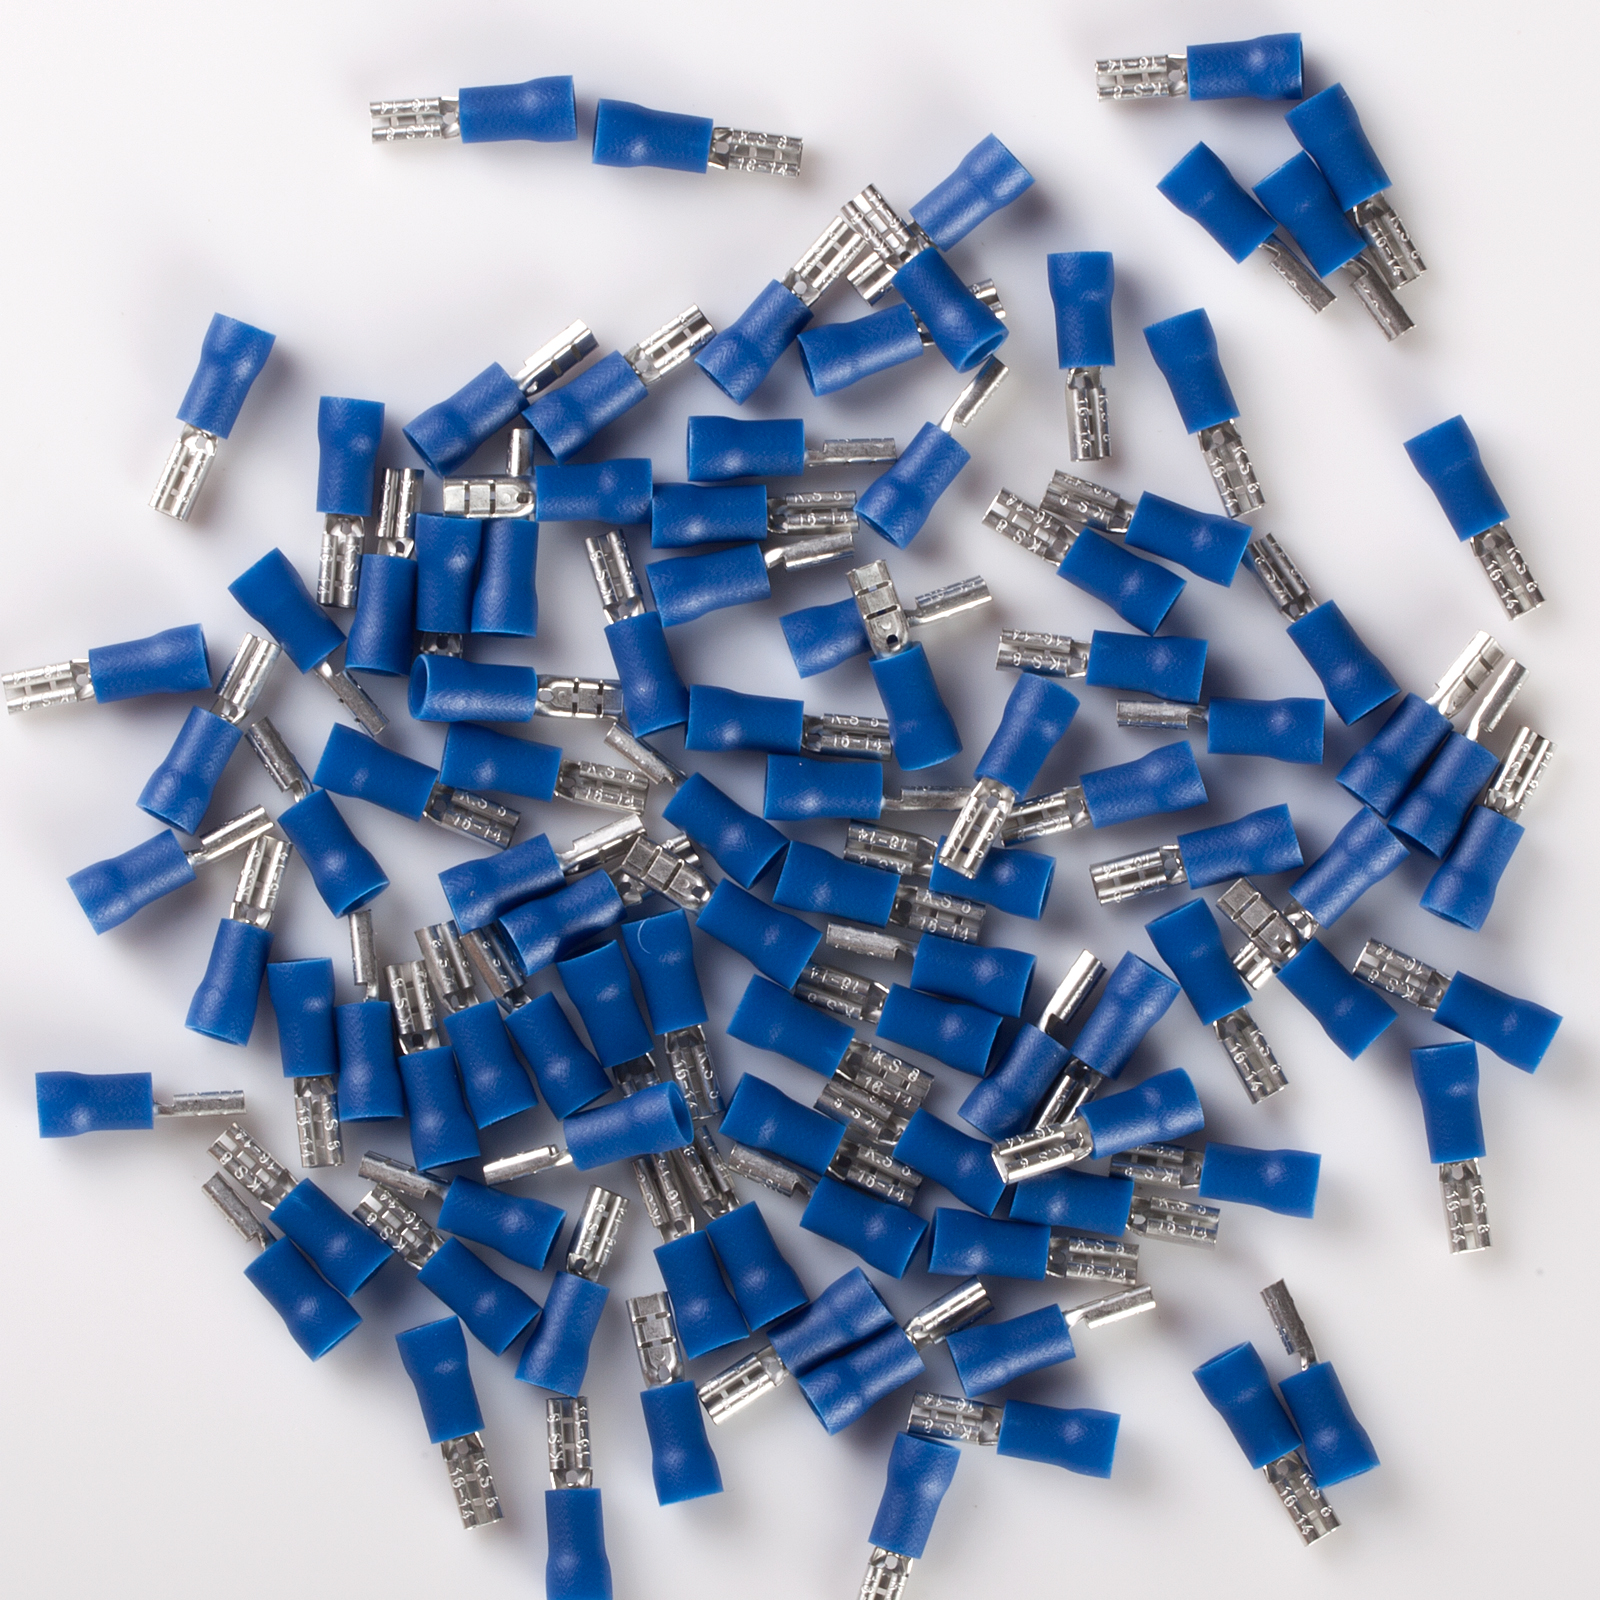 16-14 AWG VINYL QUICK DISCONNECT MALE FEMALE 250 1//4 SPADE CONNECTOR 100 pcs